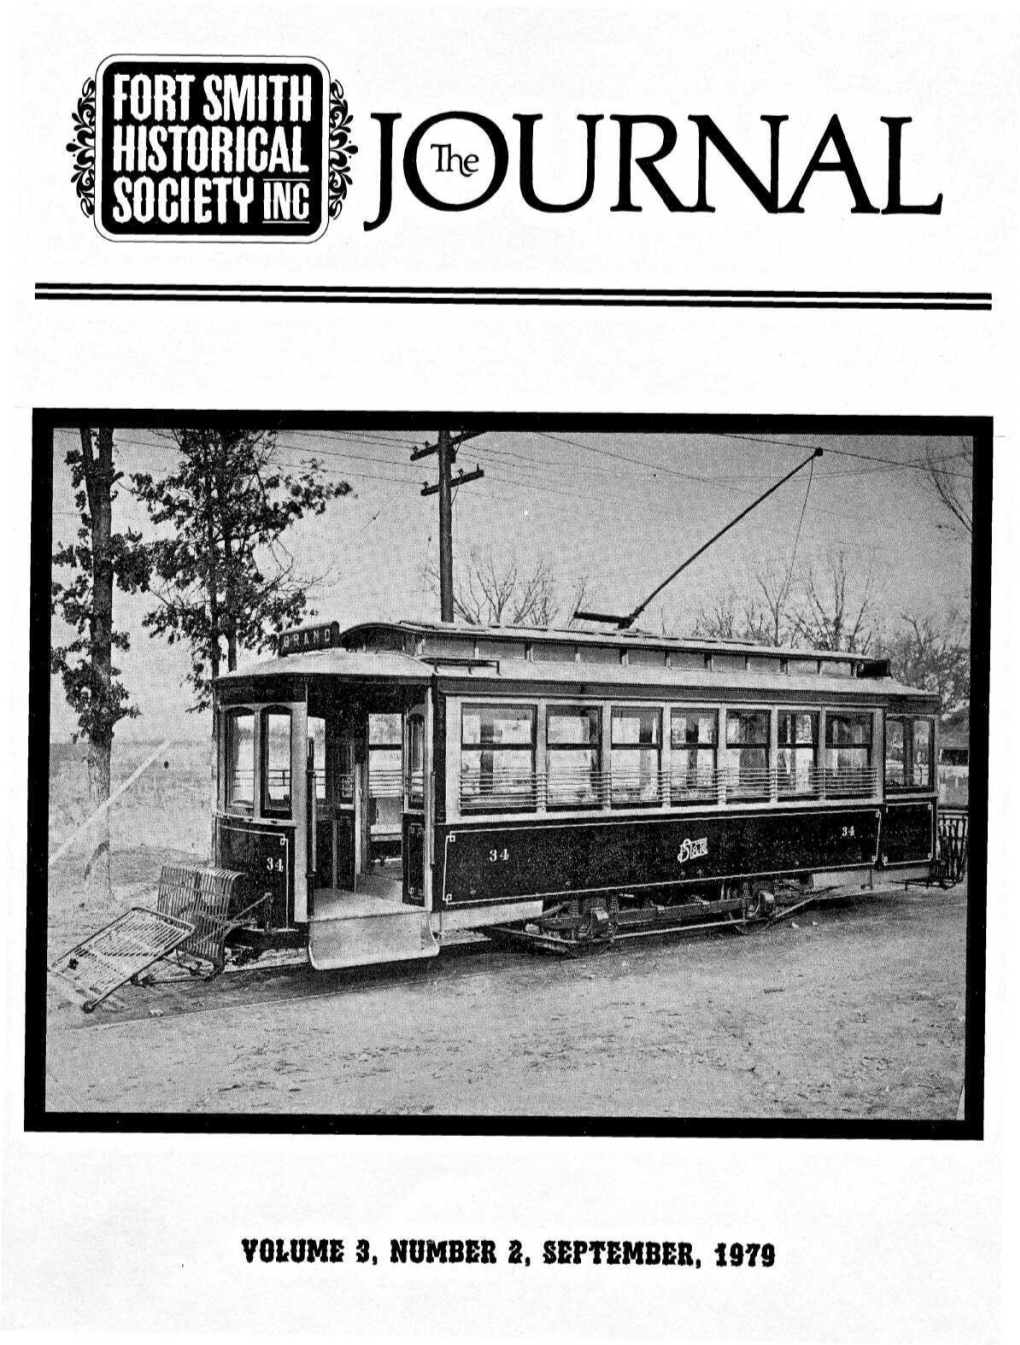 The Streetcars of Fort Smith